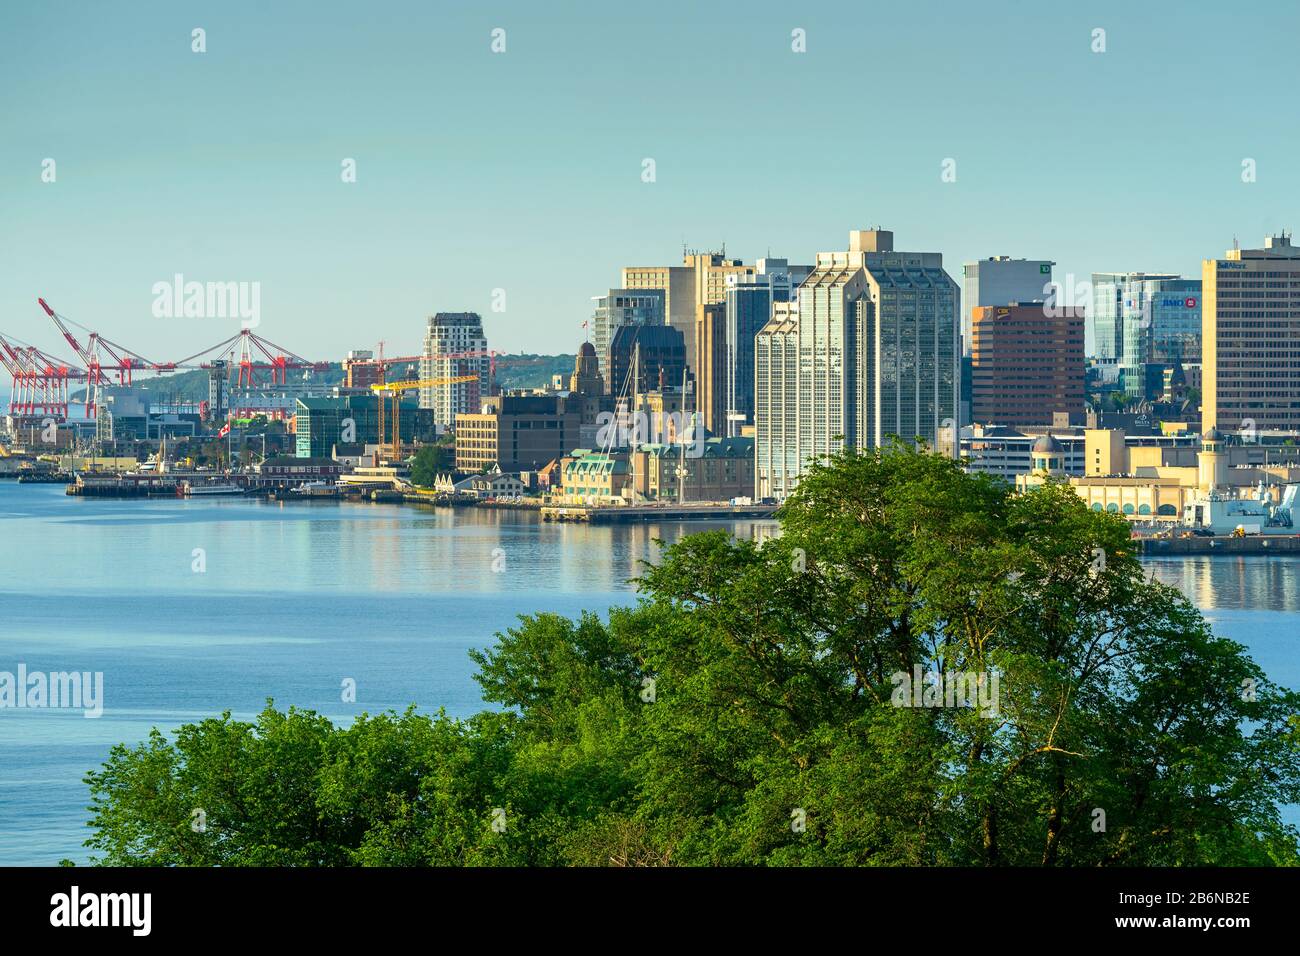 View from the Dartmouth side of Halifax Harbour, Nova Scotia, Canada, facing the waterfront of the city of Halifax. Stock Photo